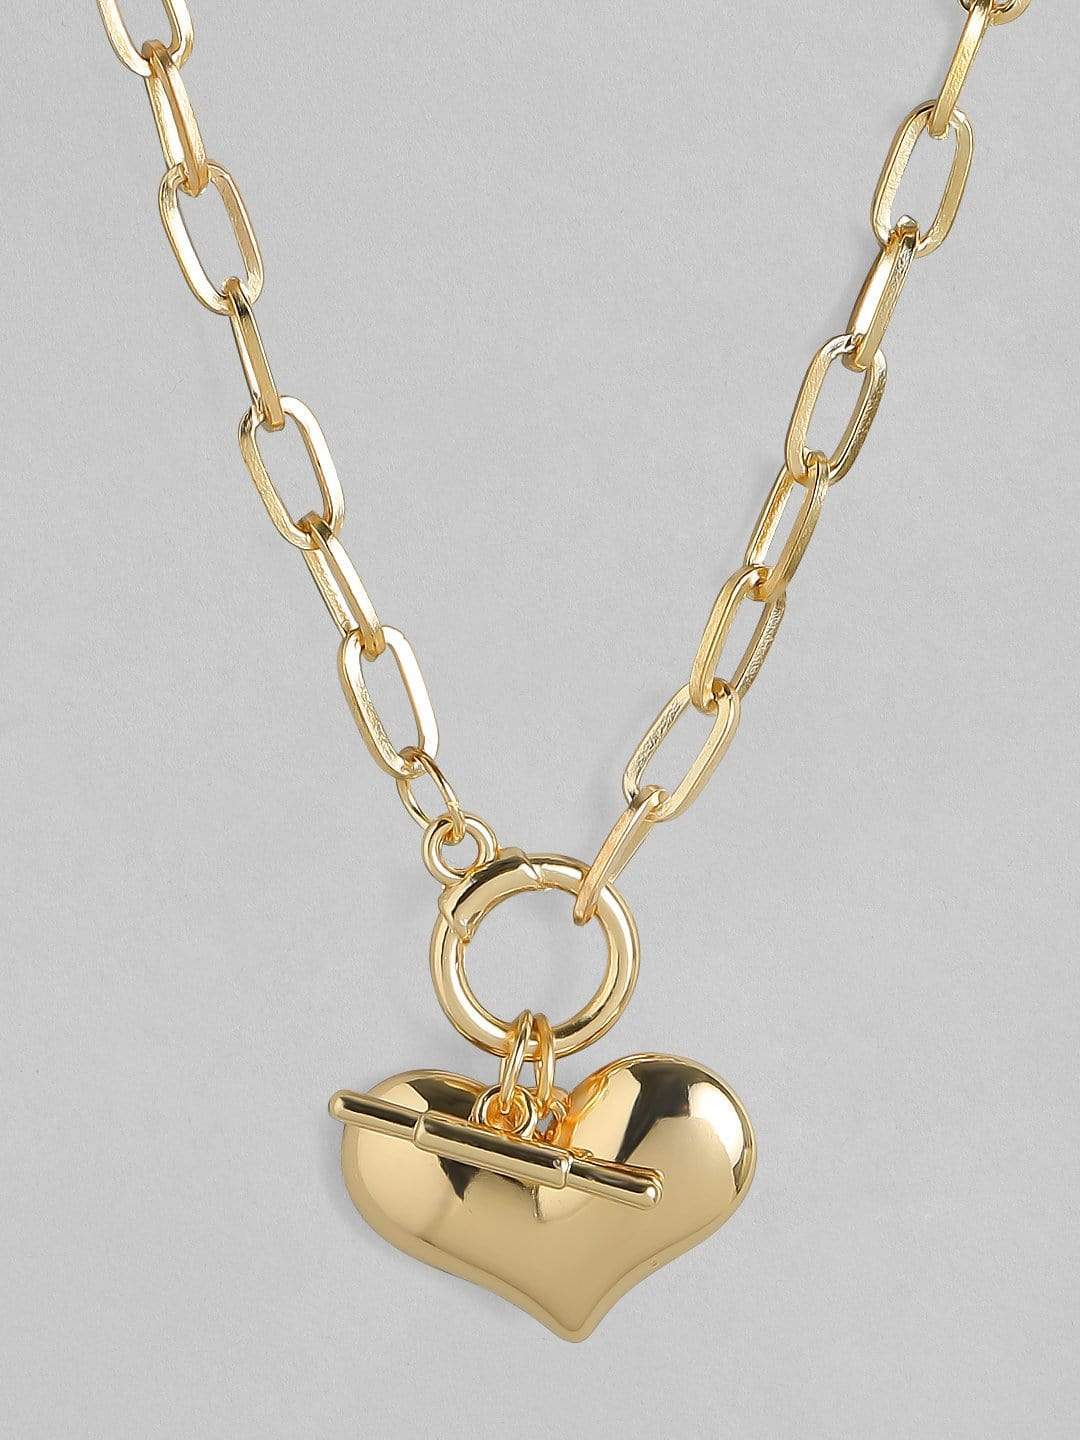 Rubans Gold Plated Handcrafted Heart Shape Interlinked  Chain Necklace Chain & Necklaces